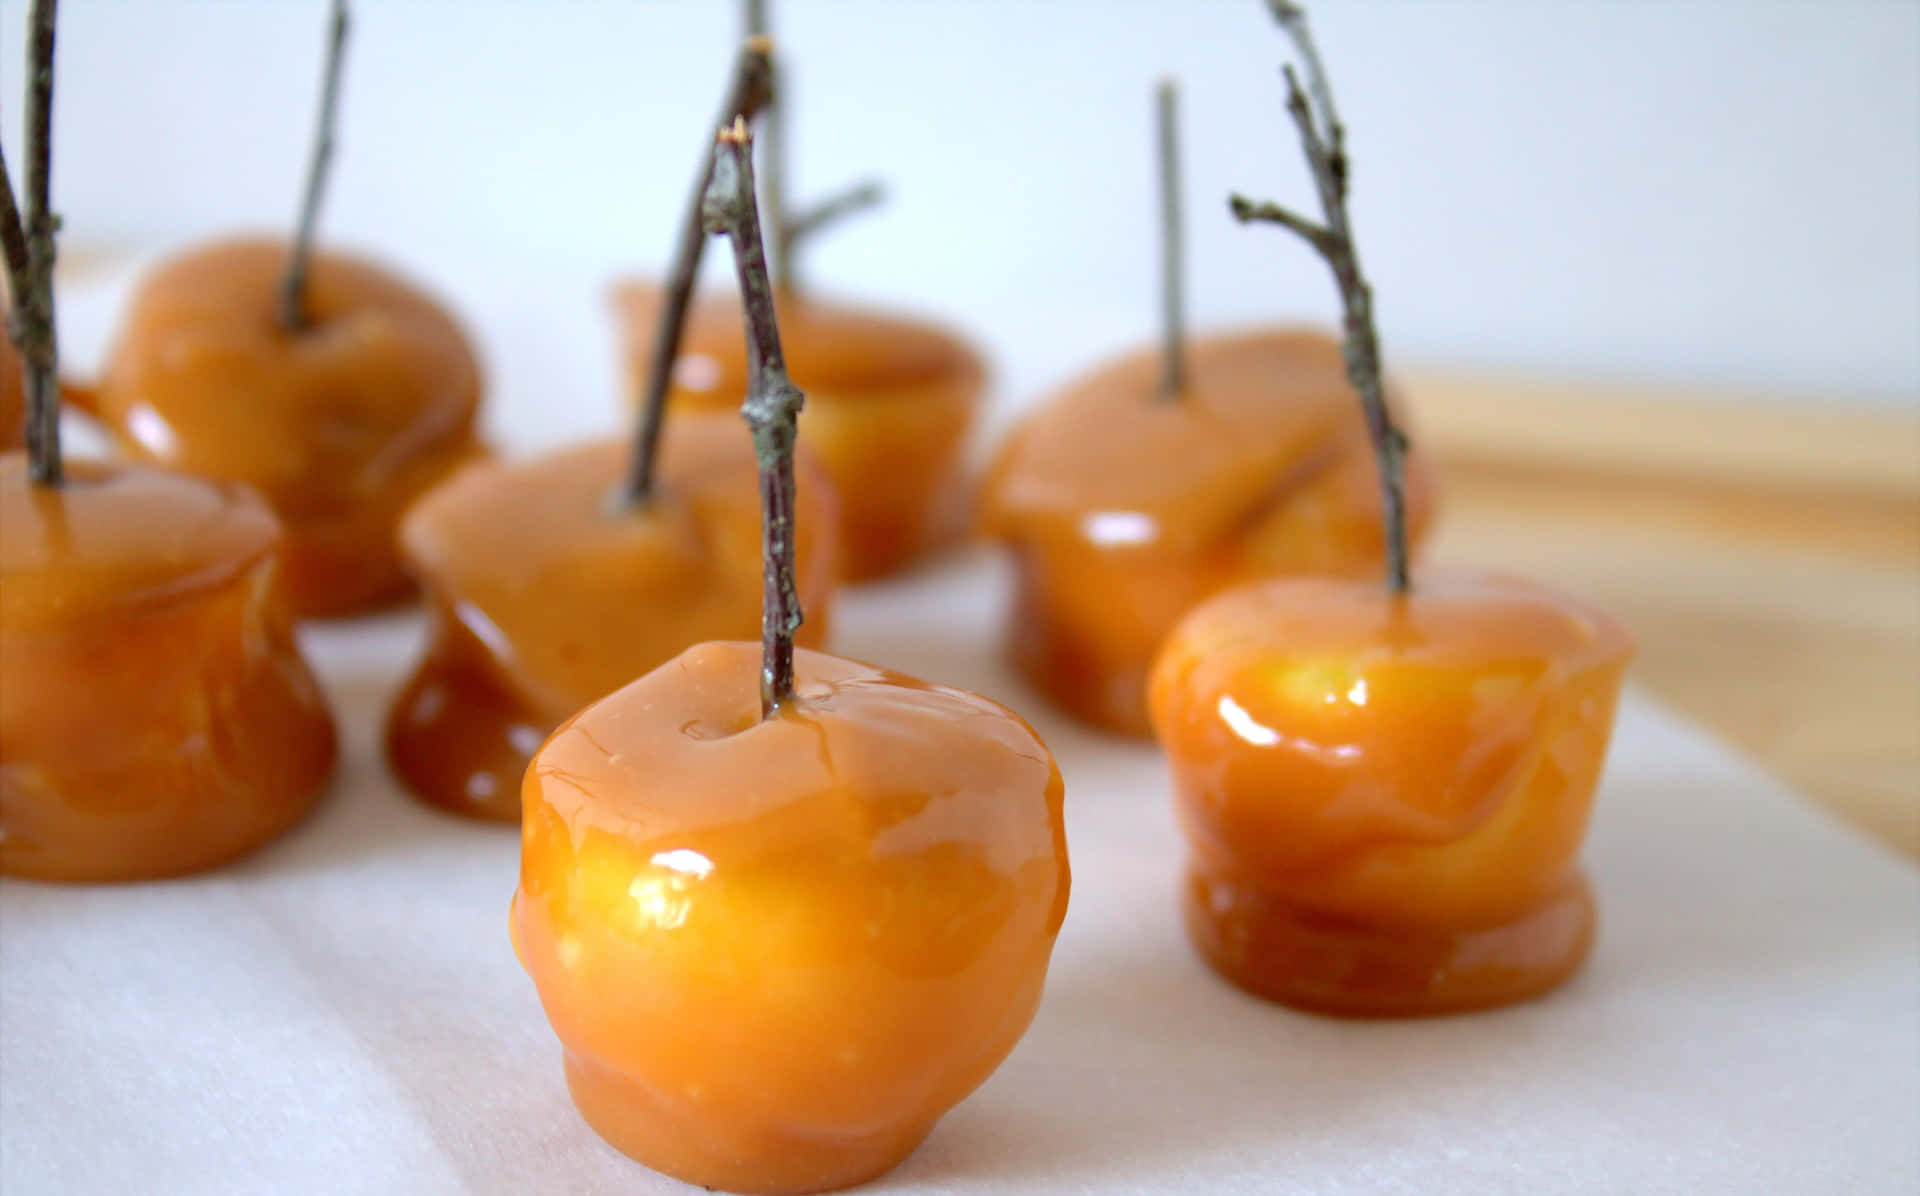 Delectable Caramel Apples ready to be enjoyed Wallpaper